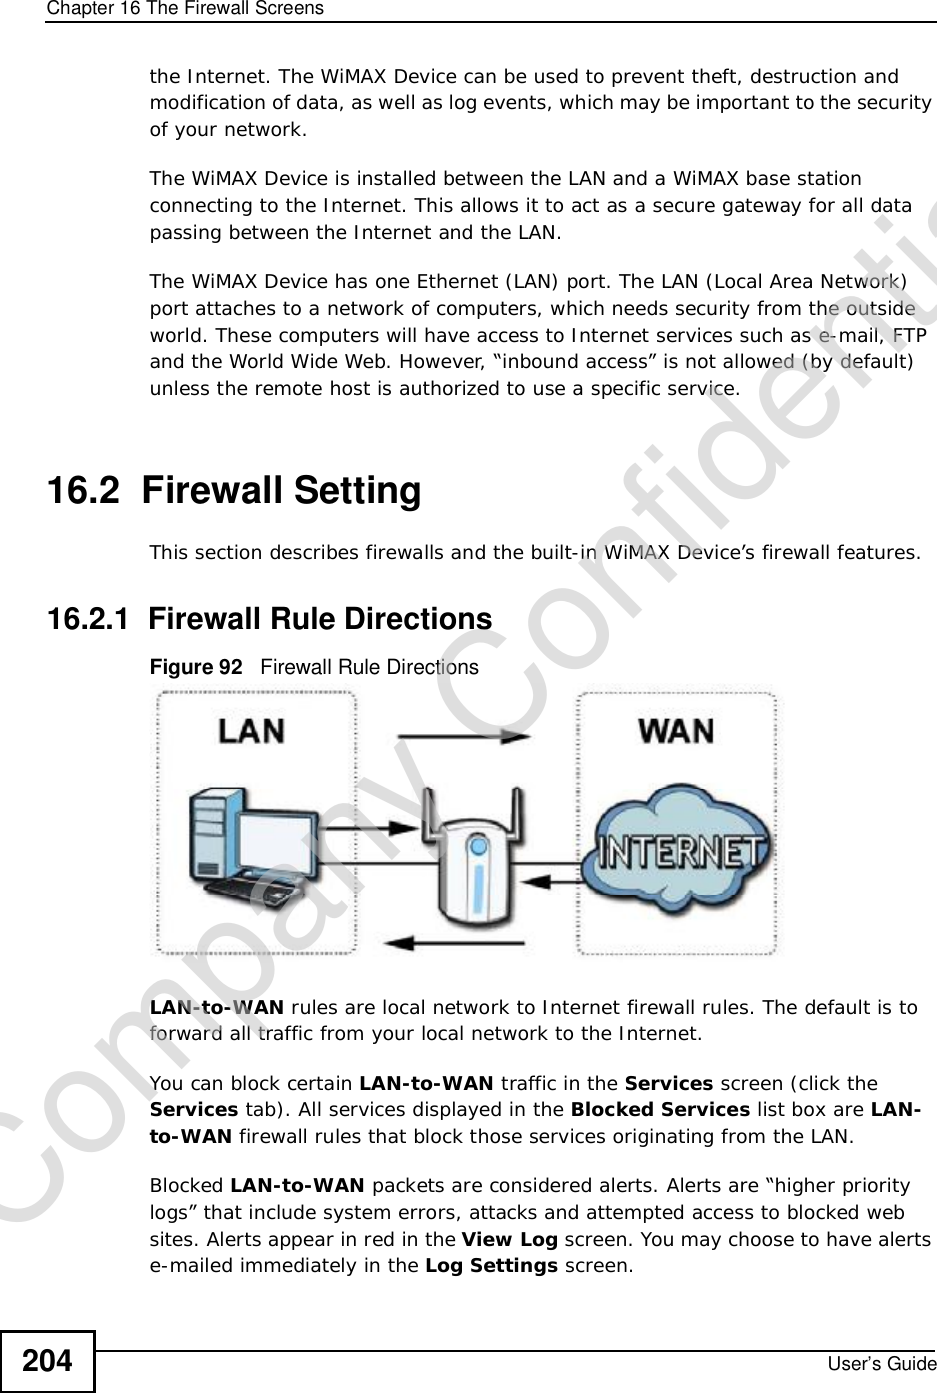 Chapter 16The Firewall ScreensUser’s Guide204the Internet. The WiMAX Device can be used to prevent theft, destruction and modification of data, as well as log events, which may be important to the security of your network. The WiMAX Device is installed between the LAN and a WiMAX base station connecting to the Internet. This allows it to act as a secure gateway for all data passing between the Internet and the LAN.The WiMAX Device has one Ethernet (LAN) port. The LAN (Local Area Network) port attaches to a network of computers, which needs security from the outside world. These computers will have access to Internet services such as e-mail, FTP and the World Wide Web. However, “inbound access” is not allowed (by default) unless the remote host is authorized to use a specific service.16.2  Firewall SettingThis section describes firewalls and the built-in WiMAX Device’s firewall features.16.2.1  Firewall Rule DirectionsFigure 92   Firewall Rule DirectionsLAN-to-WAN rules are local network to Internet firewall rules. The default is to forward all traffic from your local network to the Internet. You can block certain LAN-to-WAN traffic in the Services screen (click the Services tab). All services displayed in the Blocked Services list box are LAN-to-WAN firewall rules that block those services originating from the LAN. Blocked LAN-to-WAN packets are considered alerts. Alerts are “higher priority logs” that include system errors, attacks and attempted access to blocked web sites. Alerts appear in red in the View Log screen. You may choose to have alerts e-mailed immediately in the Log Settings screen.Company Confidential